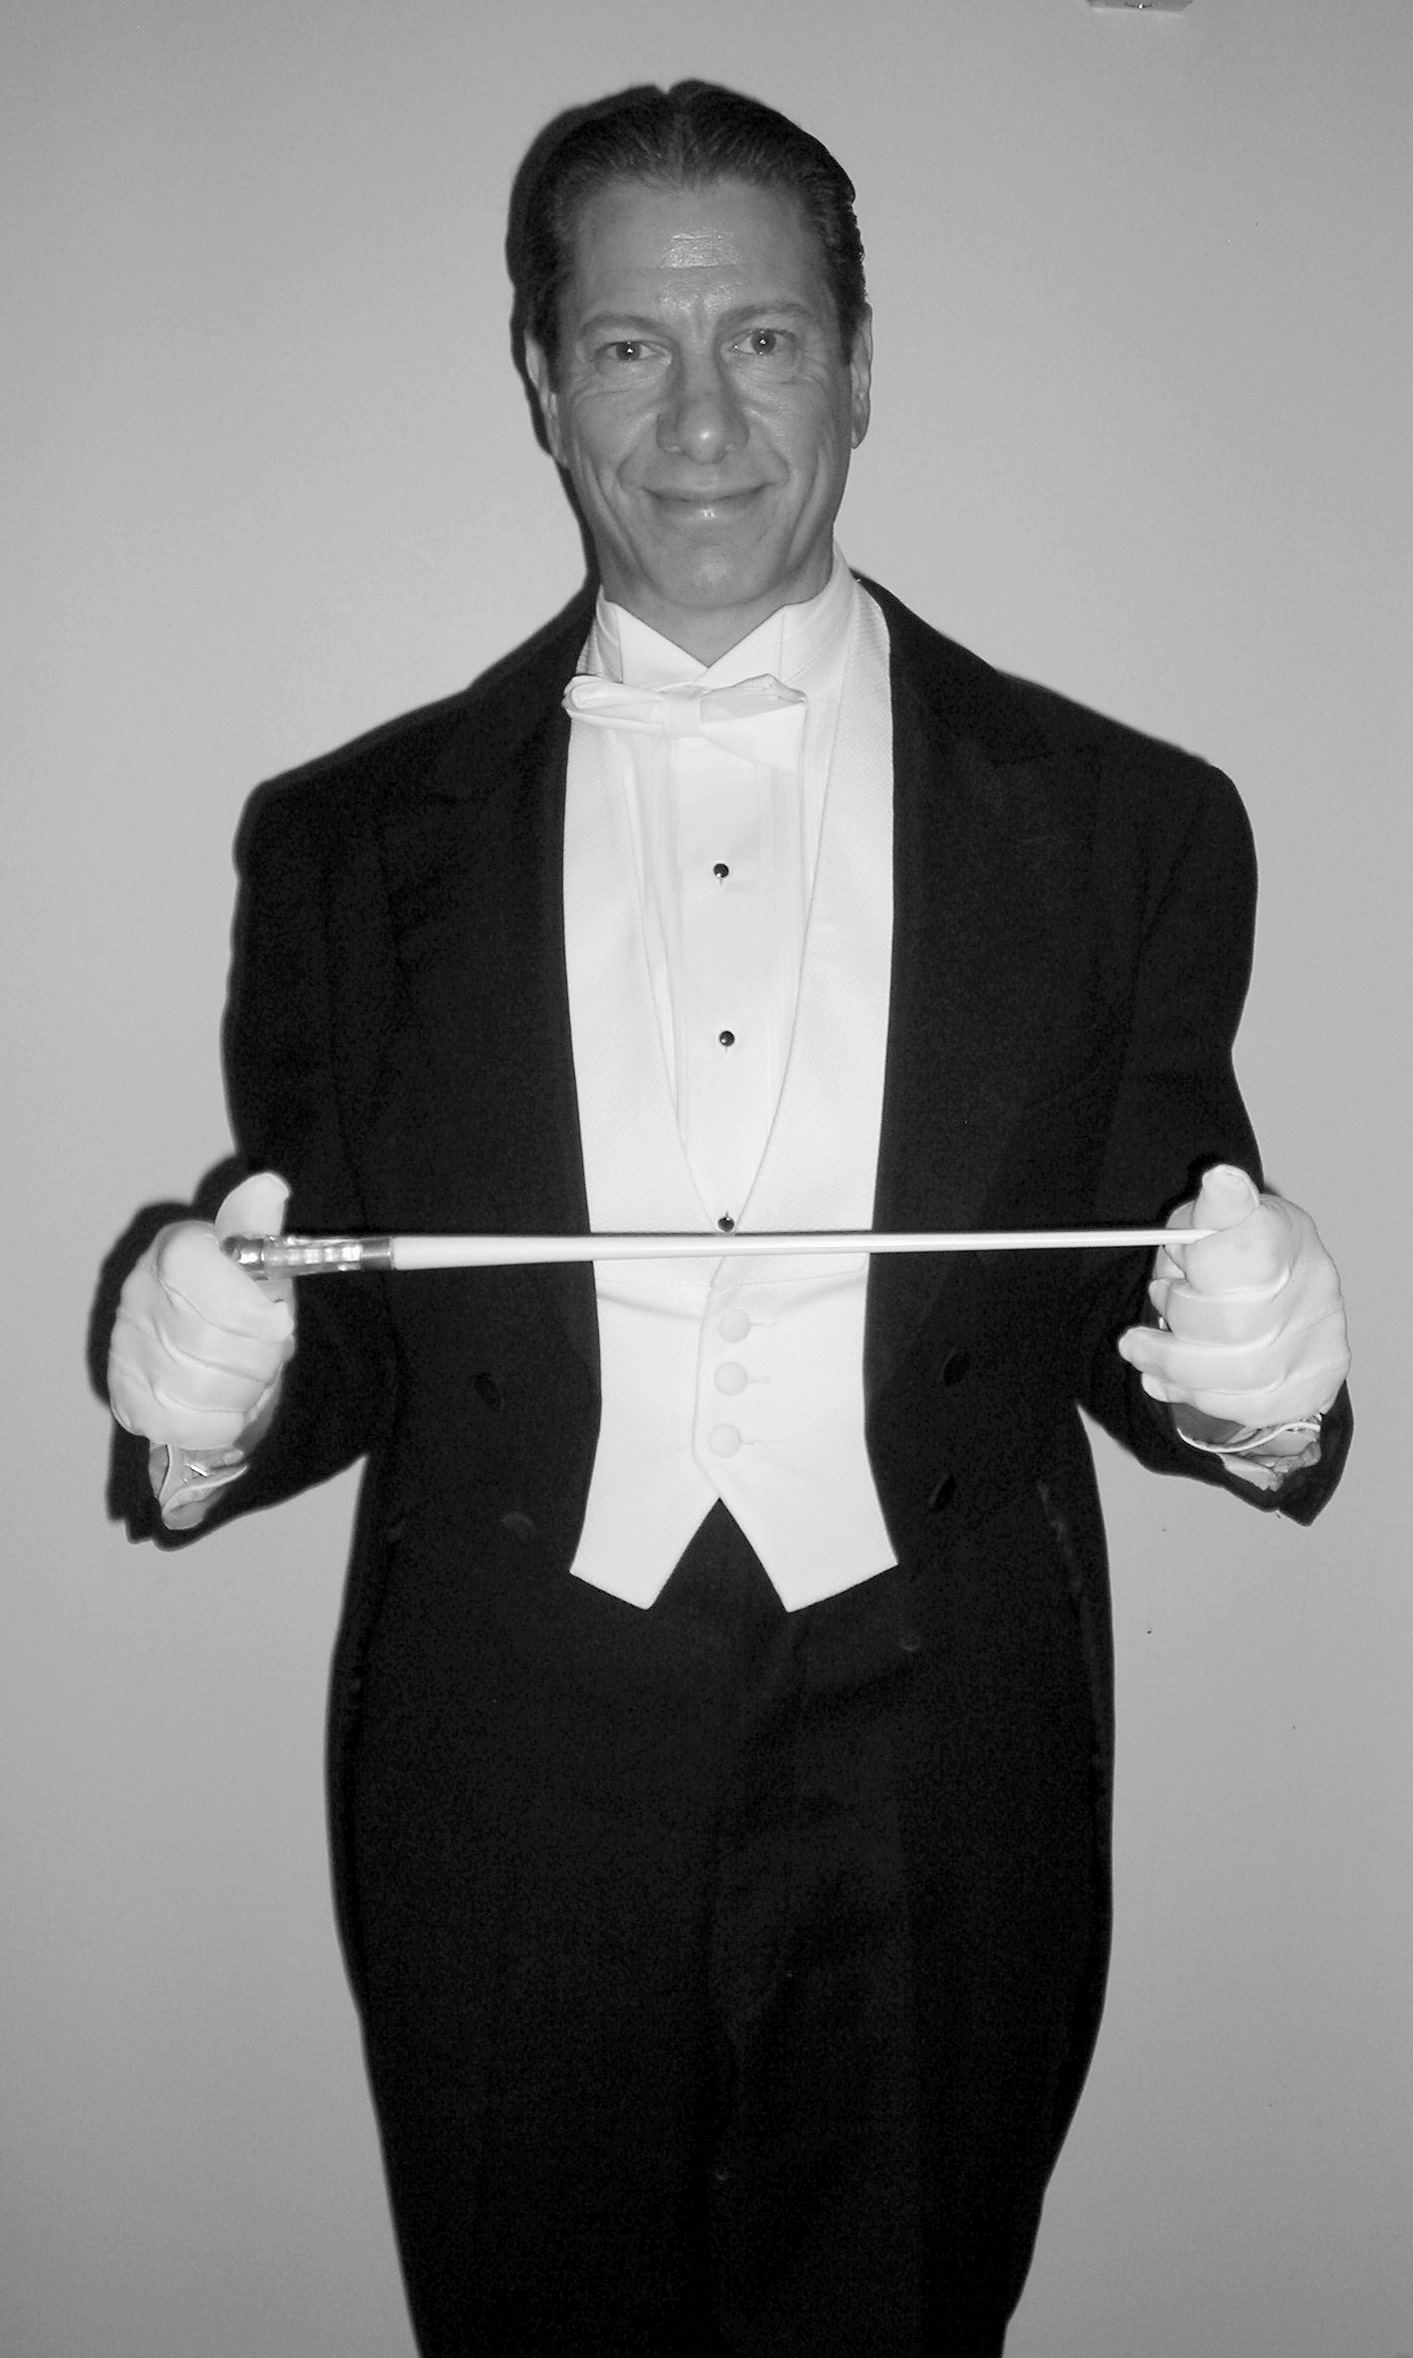 As the Orchestra Conductor in Oscar-winner The Artist